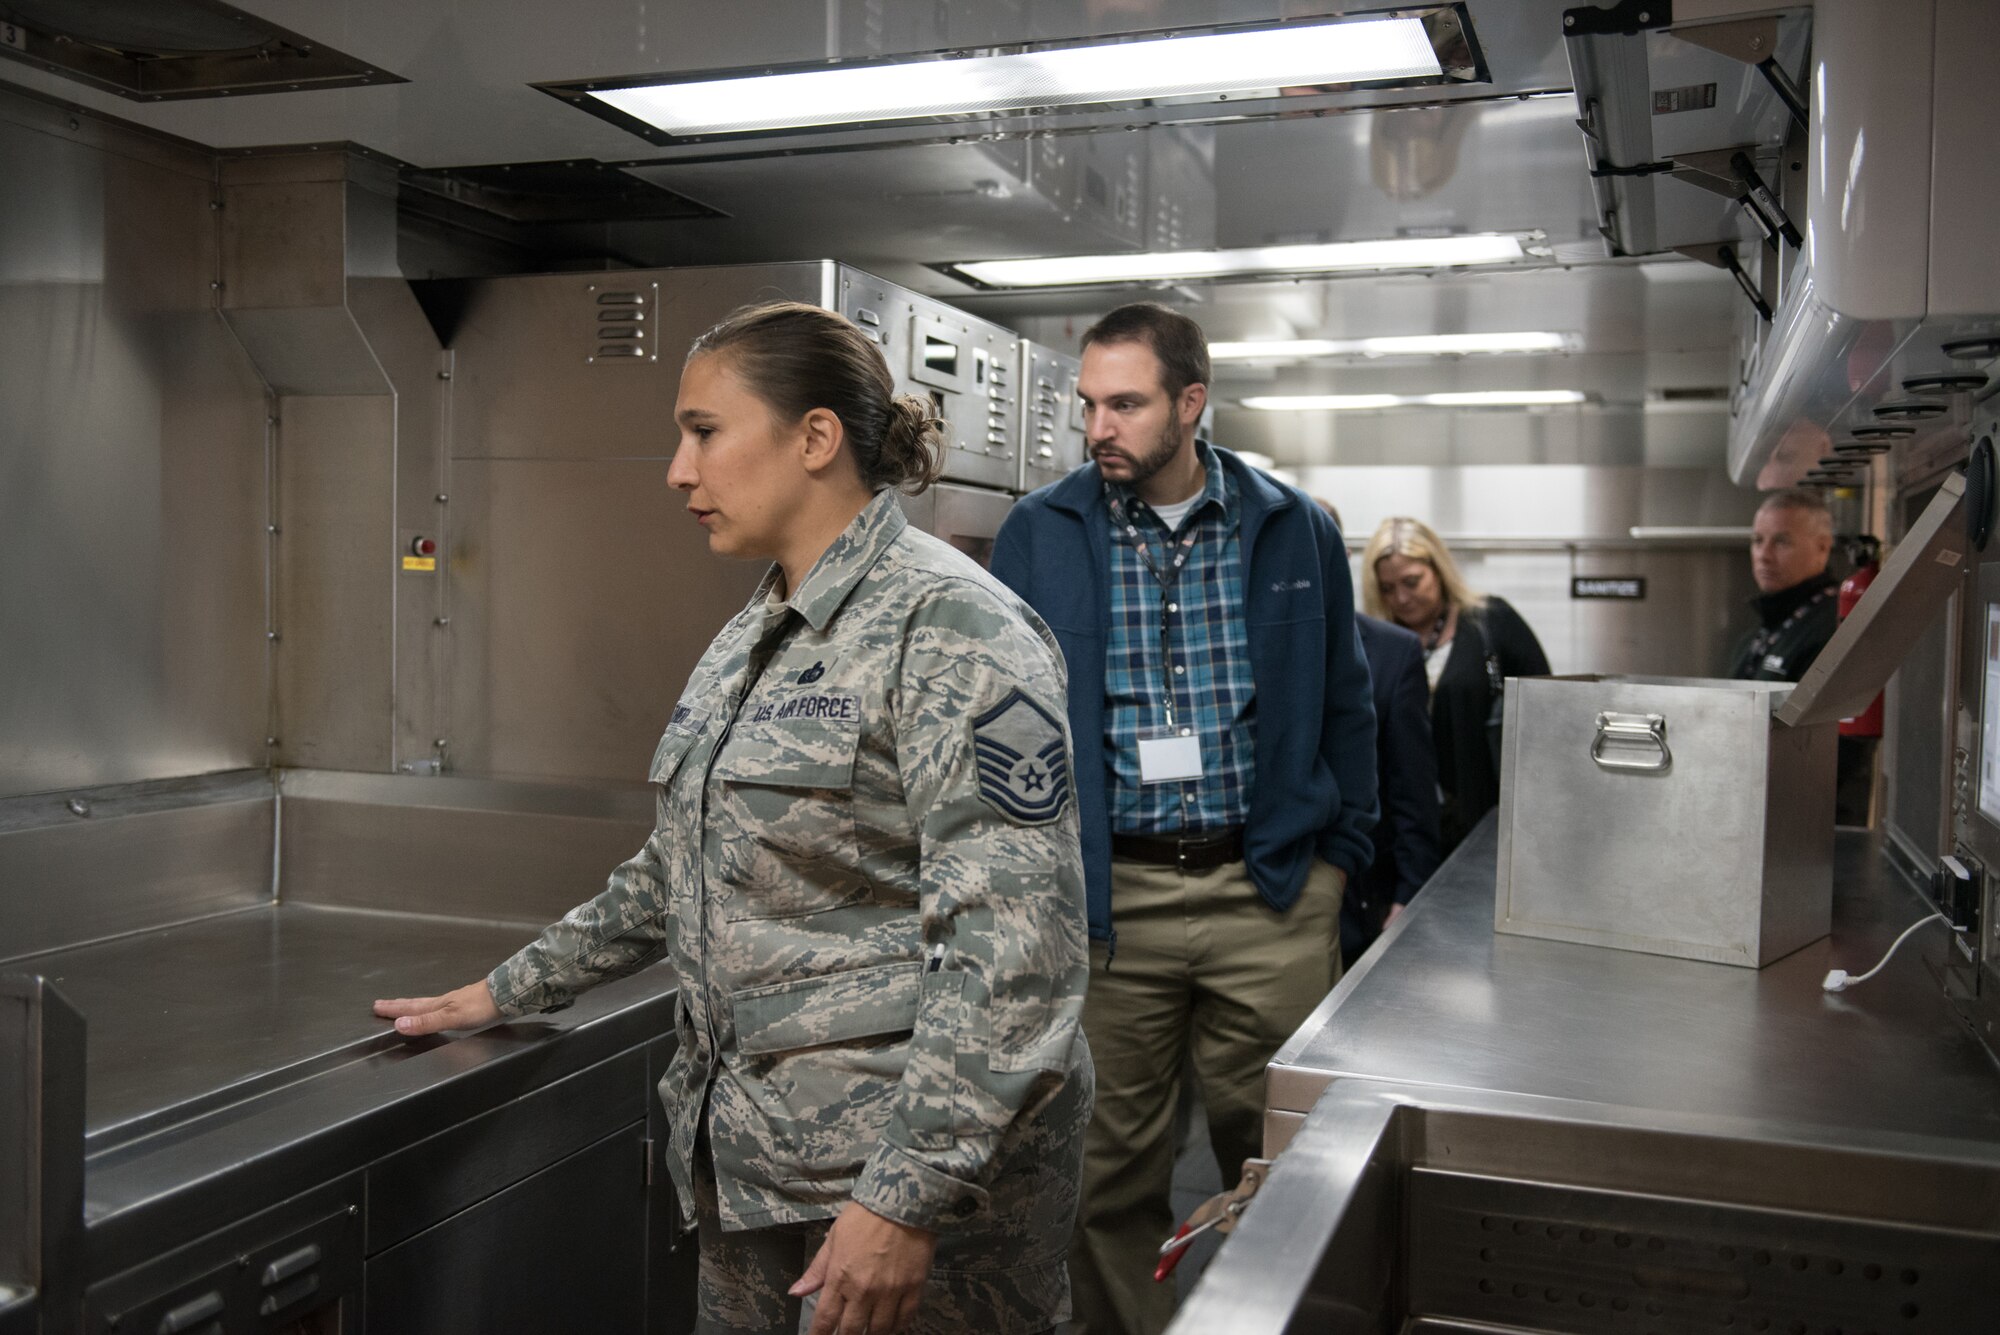 Master Sgt. Jennifer Thiery, services superintendent for the 123rd Force Support Squadron, shows civilian employers the inside of the Disaster Relief Mobile Kitchen Trailer during an Employer Support of the Guard and Reserve “Bosslift” at the Kentucky Air National Guard Base in Louisville, Ky., Oct. 26, 2016. The Bosslift gave employers an opportunity to learn more about what their employees do when serving as reservists in the Kentucky Air National Guard. (U.S. Air National Guard photo by Master Sgt. Phil Speck)